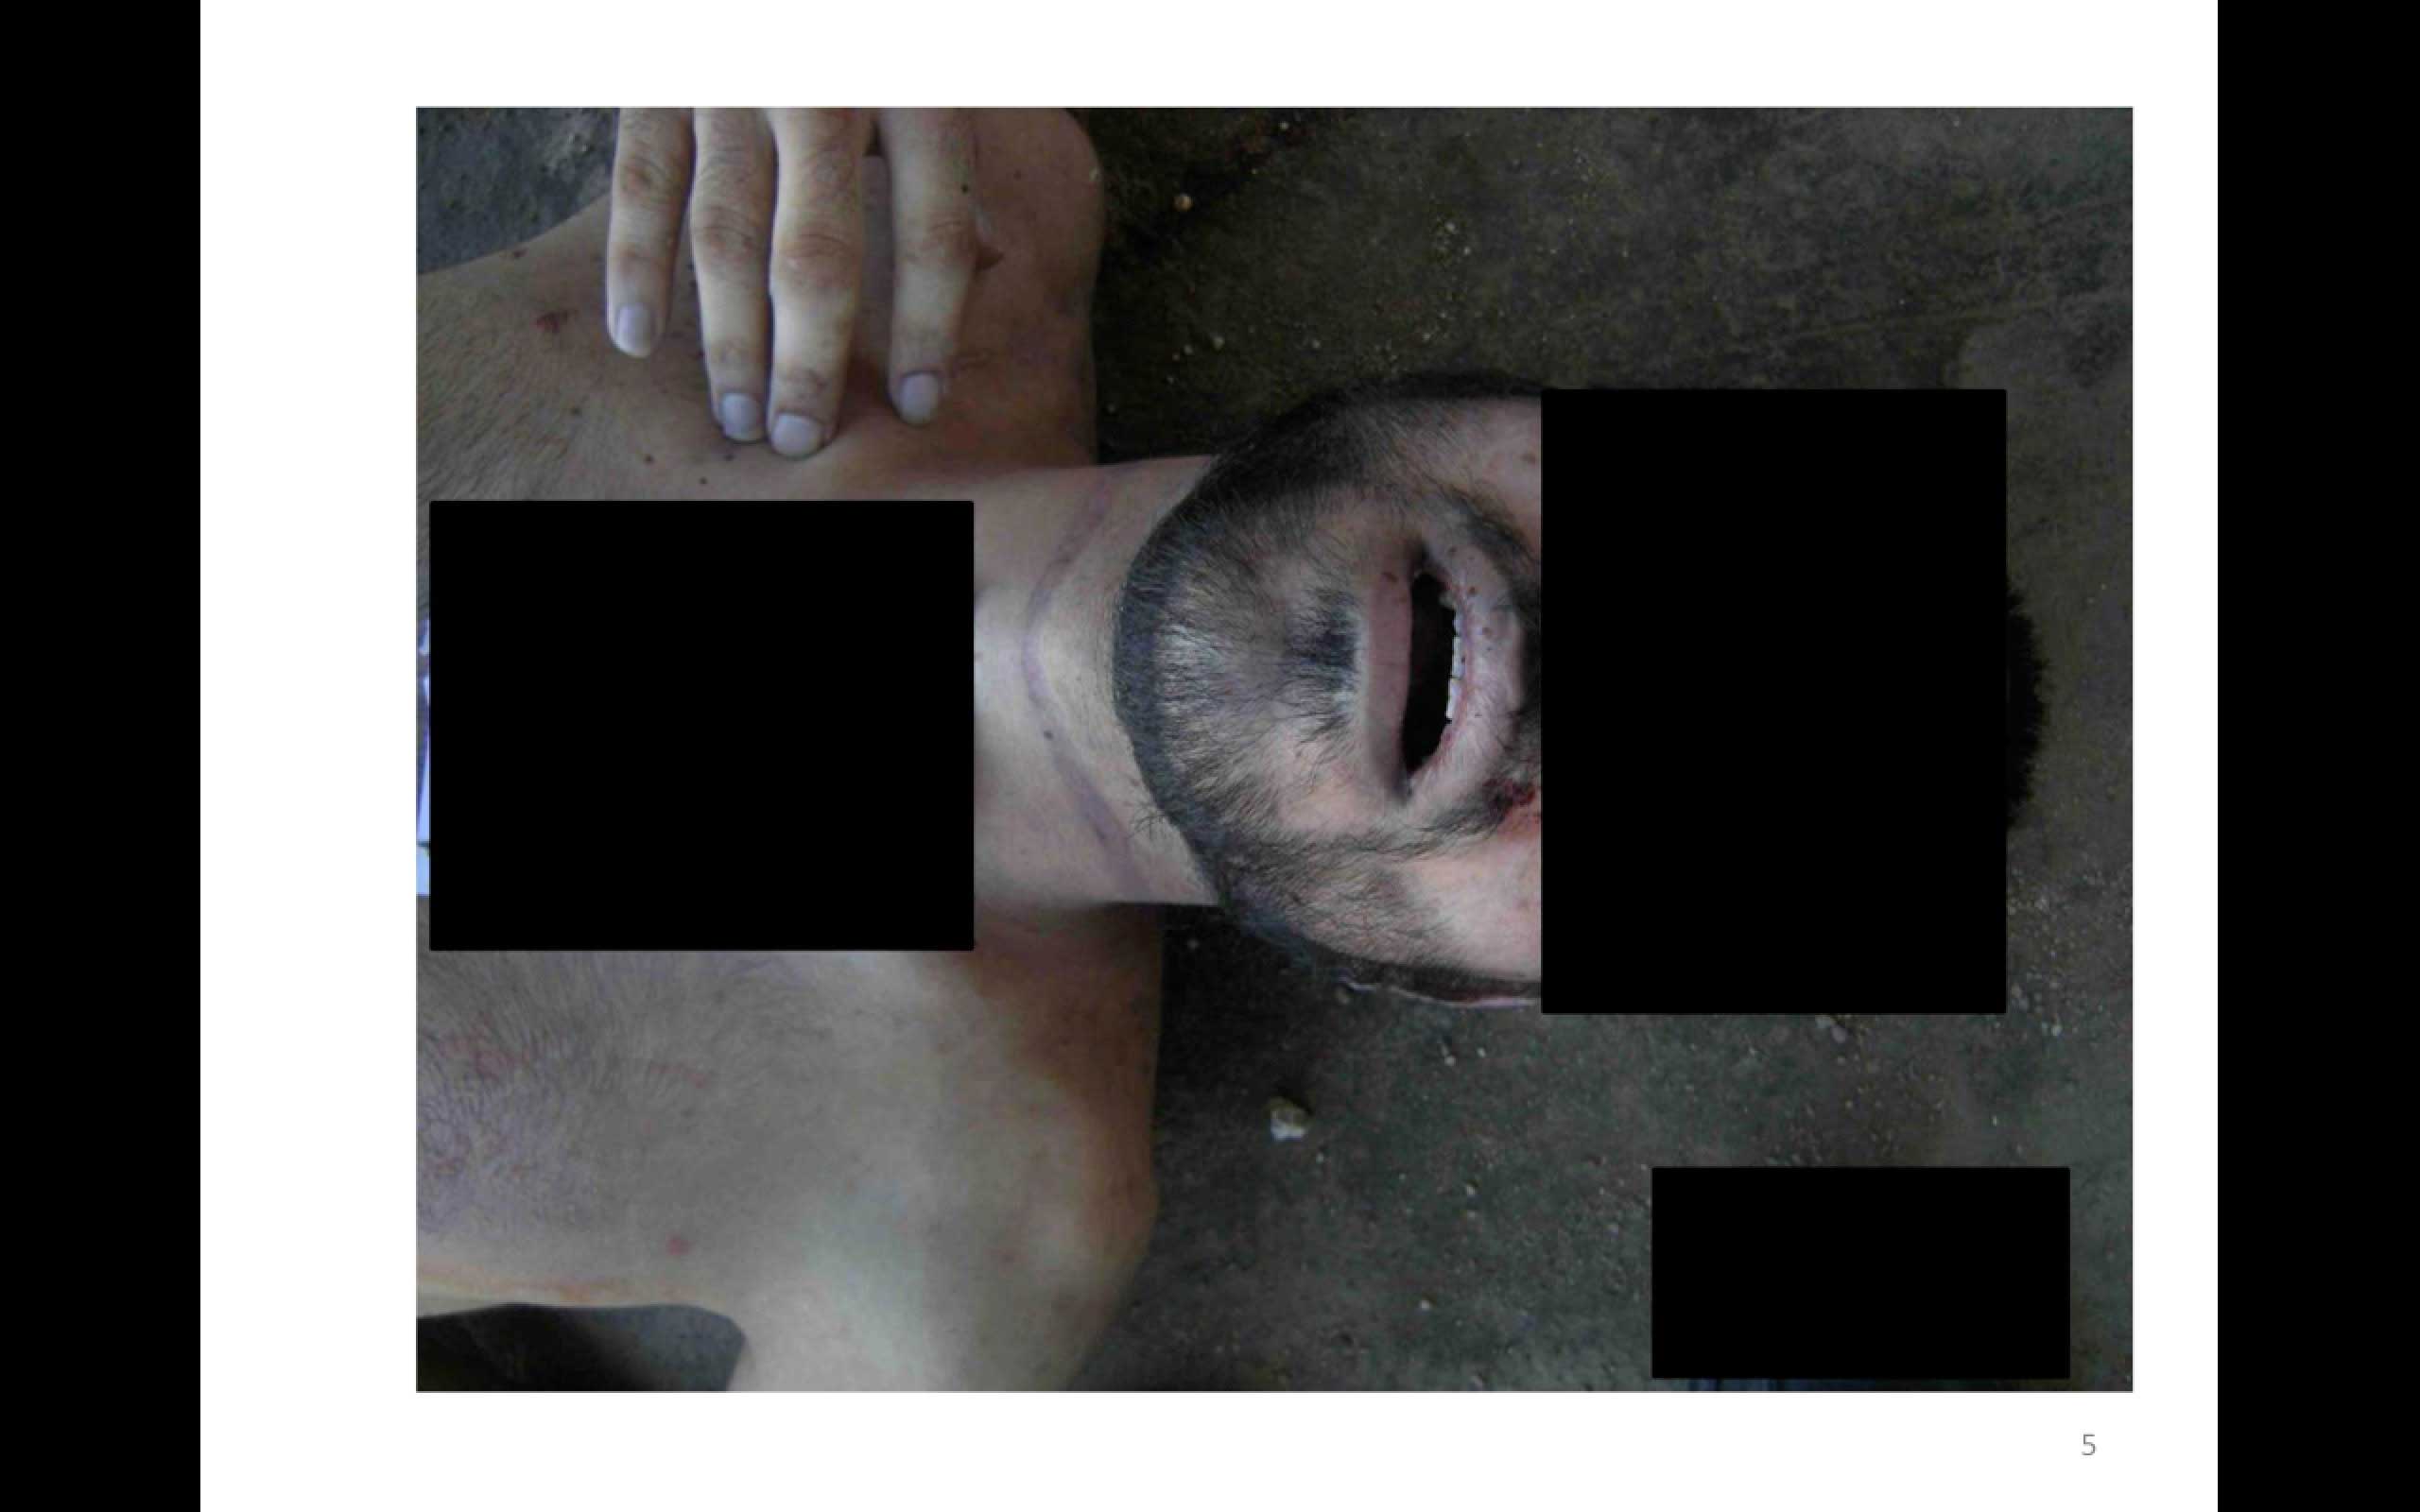 This undated photograph made available in a January 2014 report by the Carter-Ruck law firm, commissioned by the Qatari government, shows evidence of alleged torture and execution at the secret jails of Syria's president, Bashar al-Assad. It is part of an archive of 55,000 images said to depict 11,000 dead bodies photographed over the last two years and leaked to Syrian opposition forces by a Syrian military photographer.